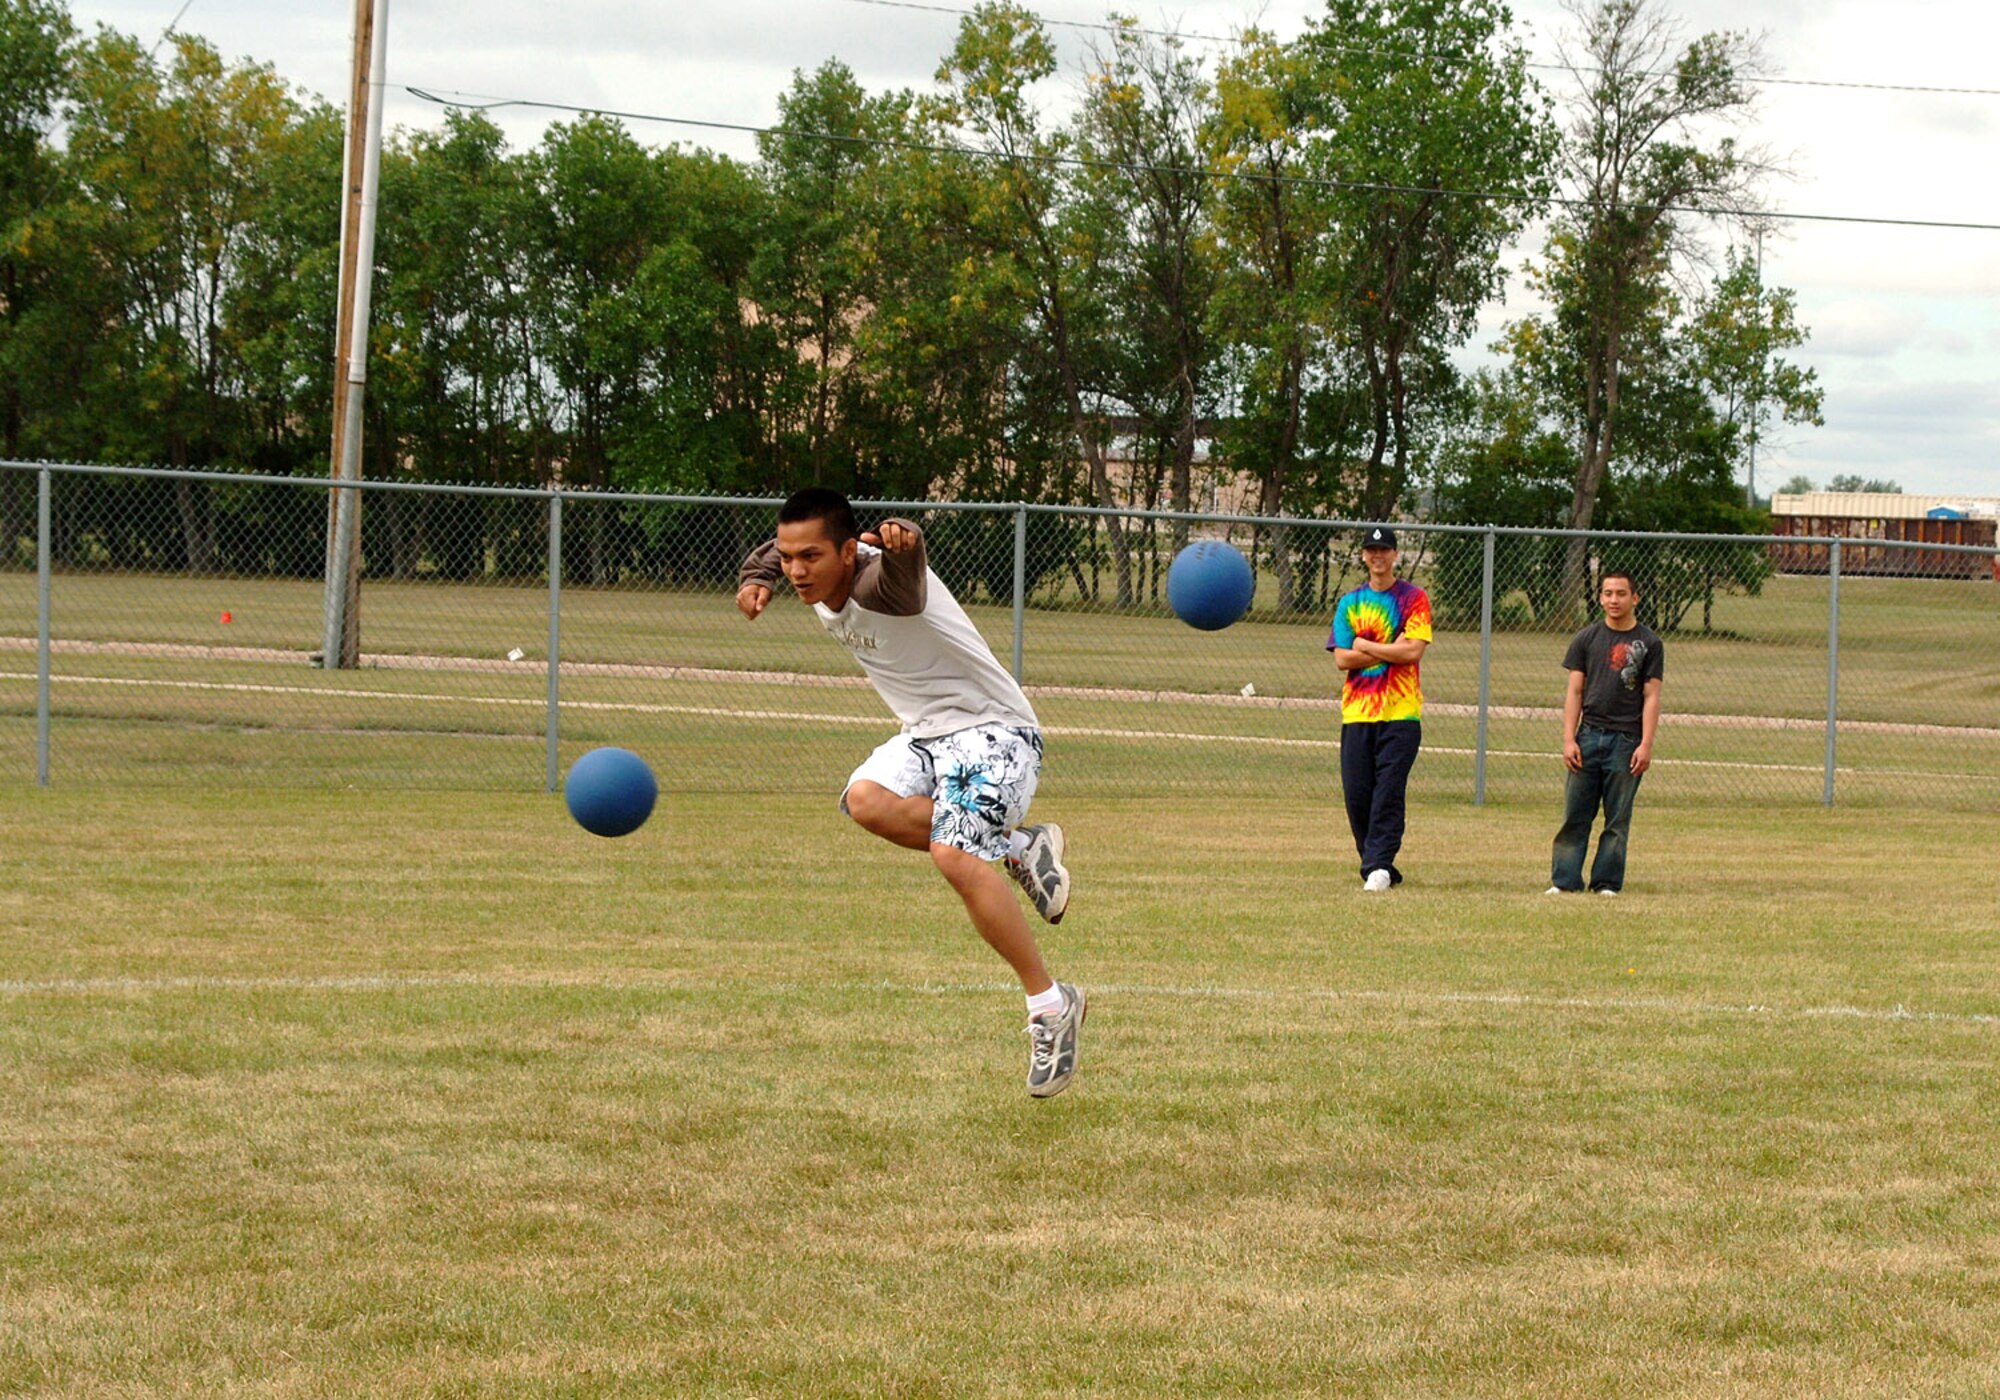 Airman 1st Class Rosseler Carreon, 319th Communications Squadron, takes the term "dodge ball" to heart, dodging two of the inflatable bombs. Dodge ball was one of many intra-squadron competitions during this year's Summer Bash. (U.S. Air Force photo/Senior Airman SerMae Lampkin)